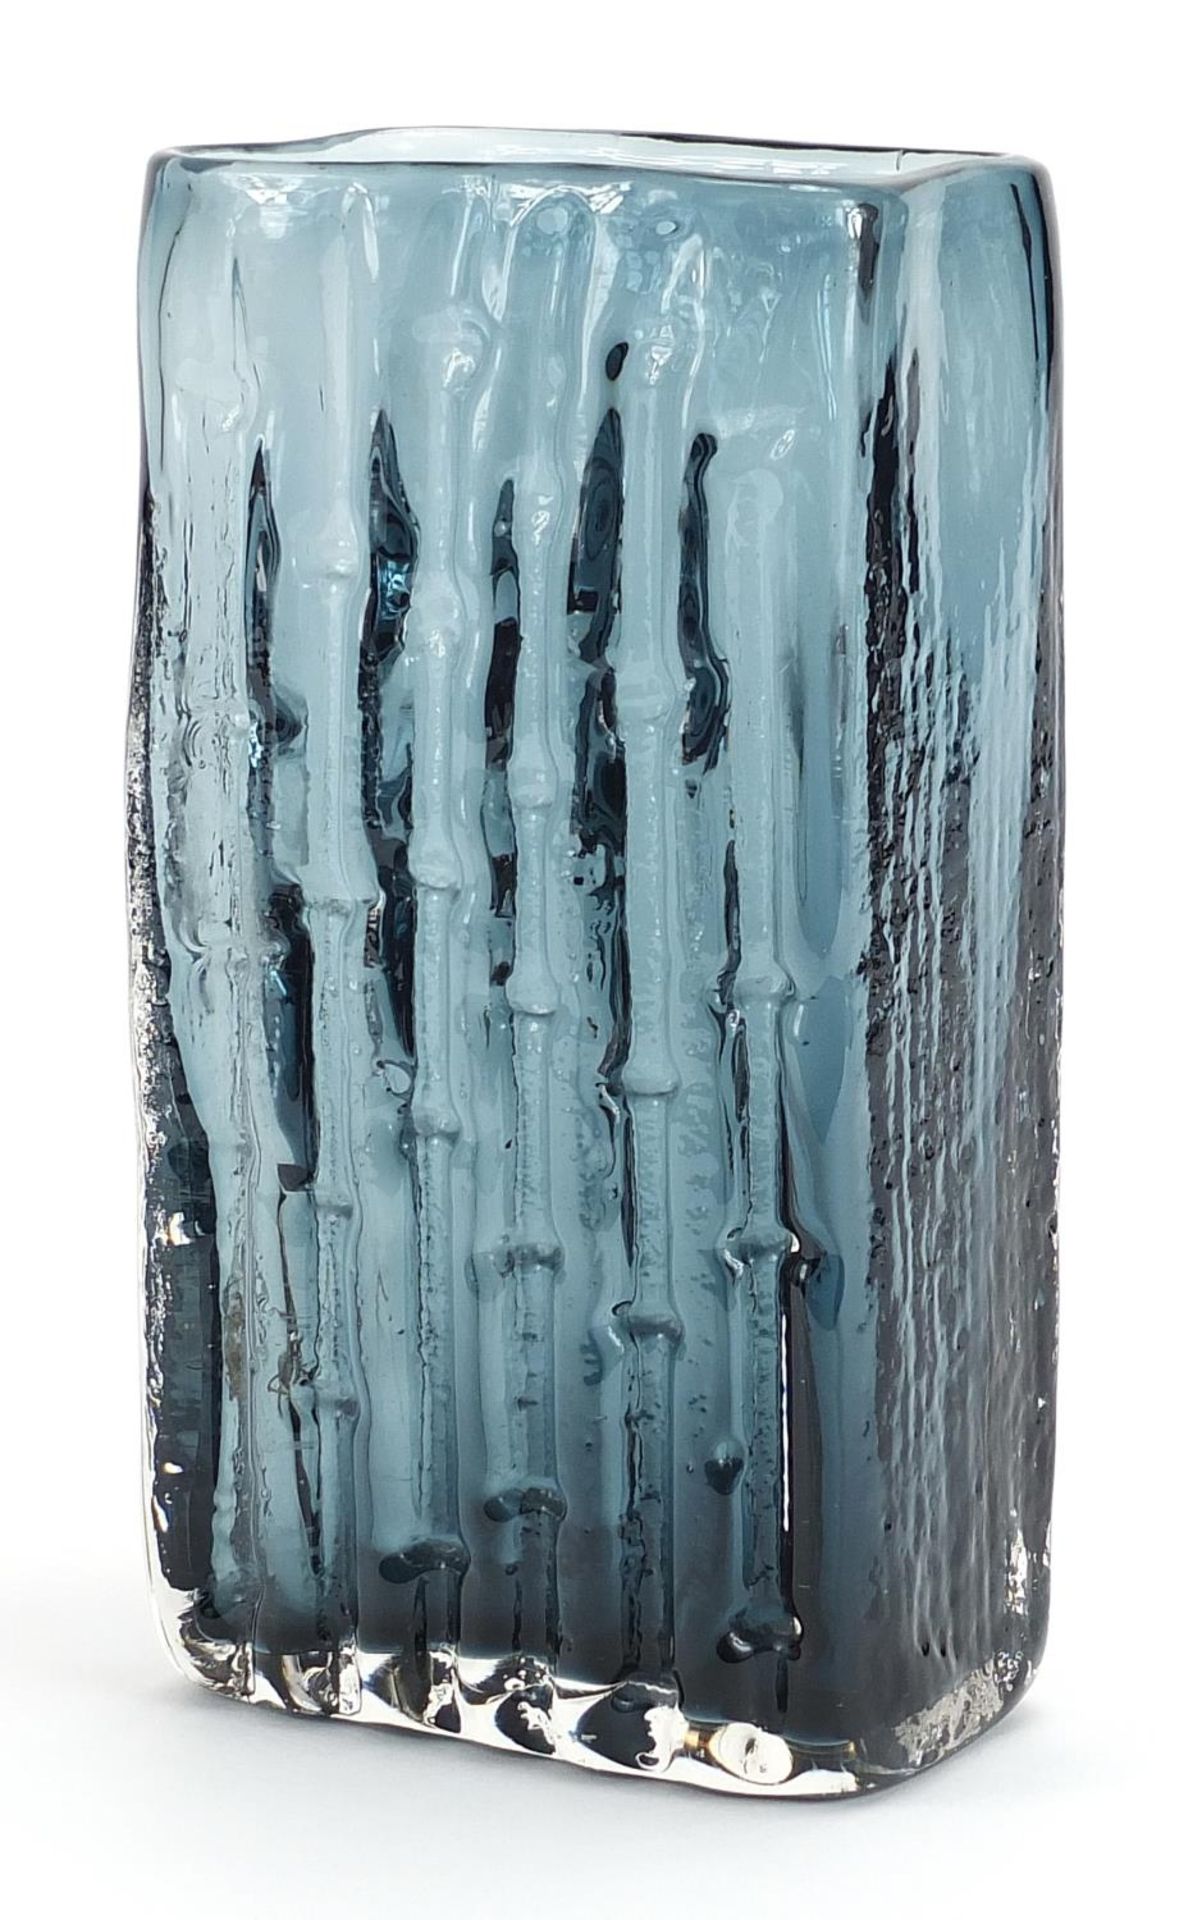 Geoffrey Baxter for Whitefriars, bamboo glass vase in indigo or pewter, 20.5cm high